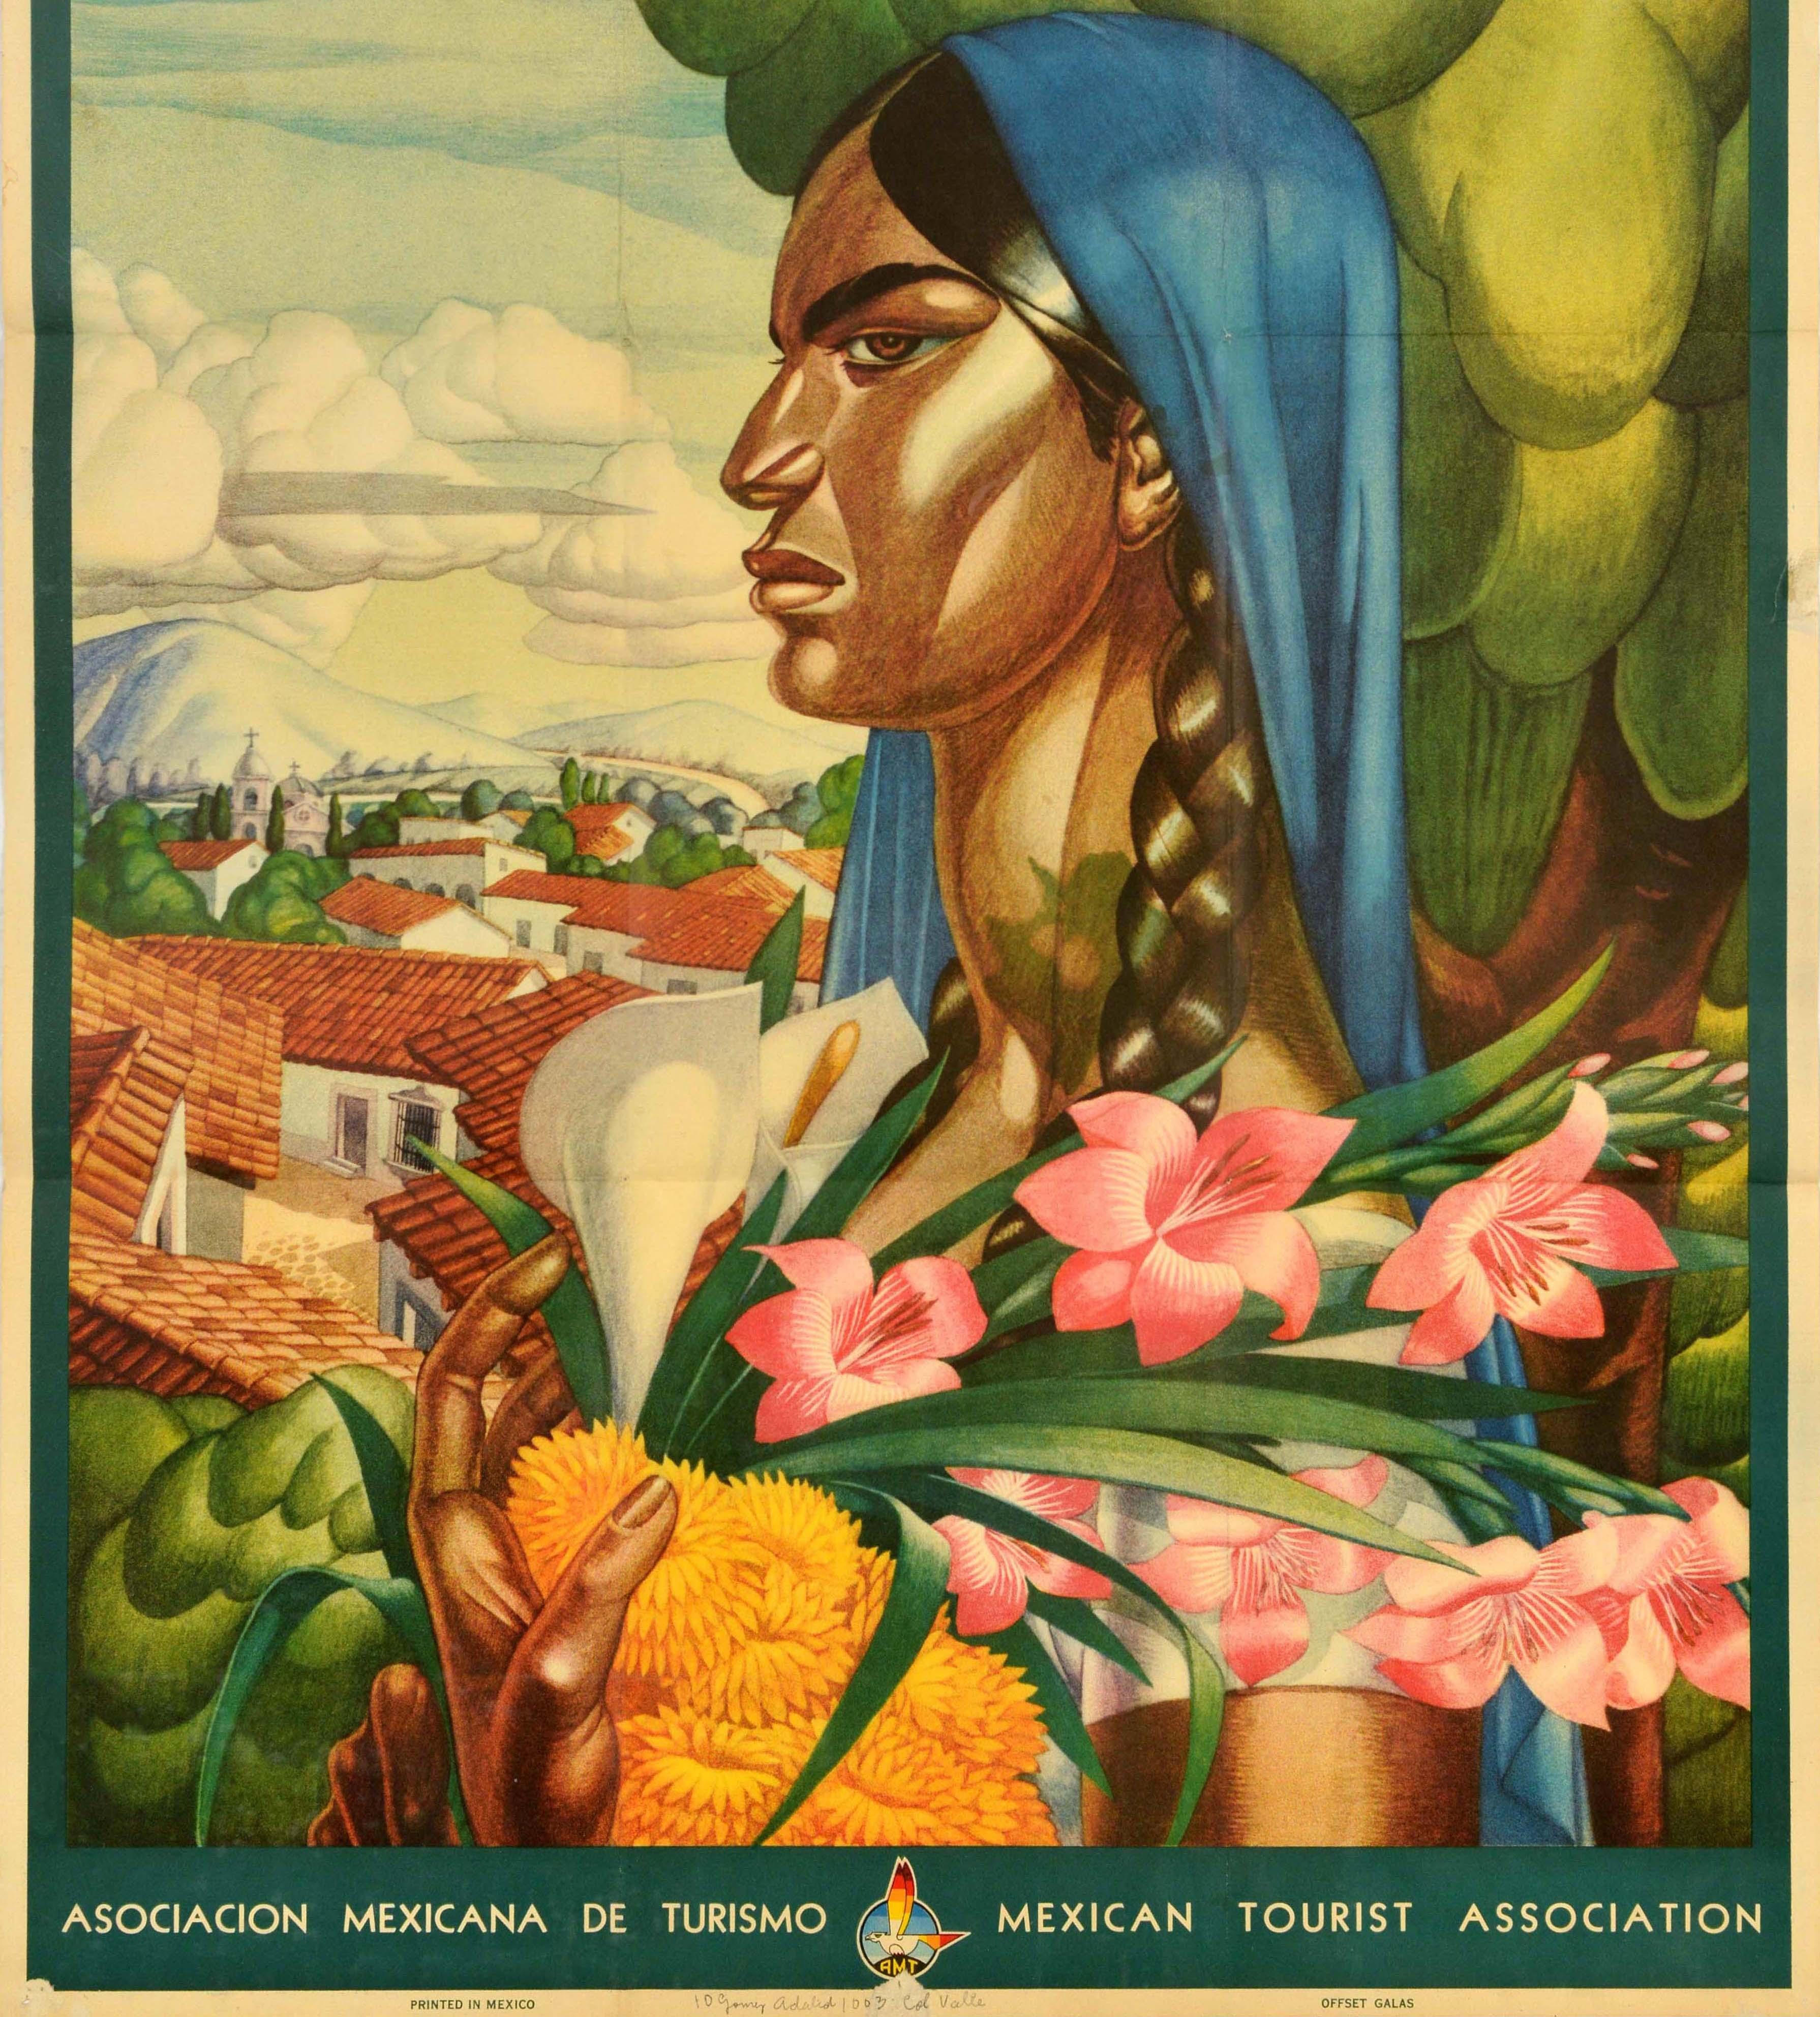 Original vintage travel poster for Mexico featuring stunning artwork by the Mexican artist Alfonso X Pena (1903-1964) depicting a lady holding yellow, pink and white iris and lily flowers with a tree and view over rooftops leading to hills in the